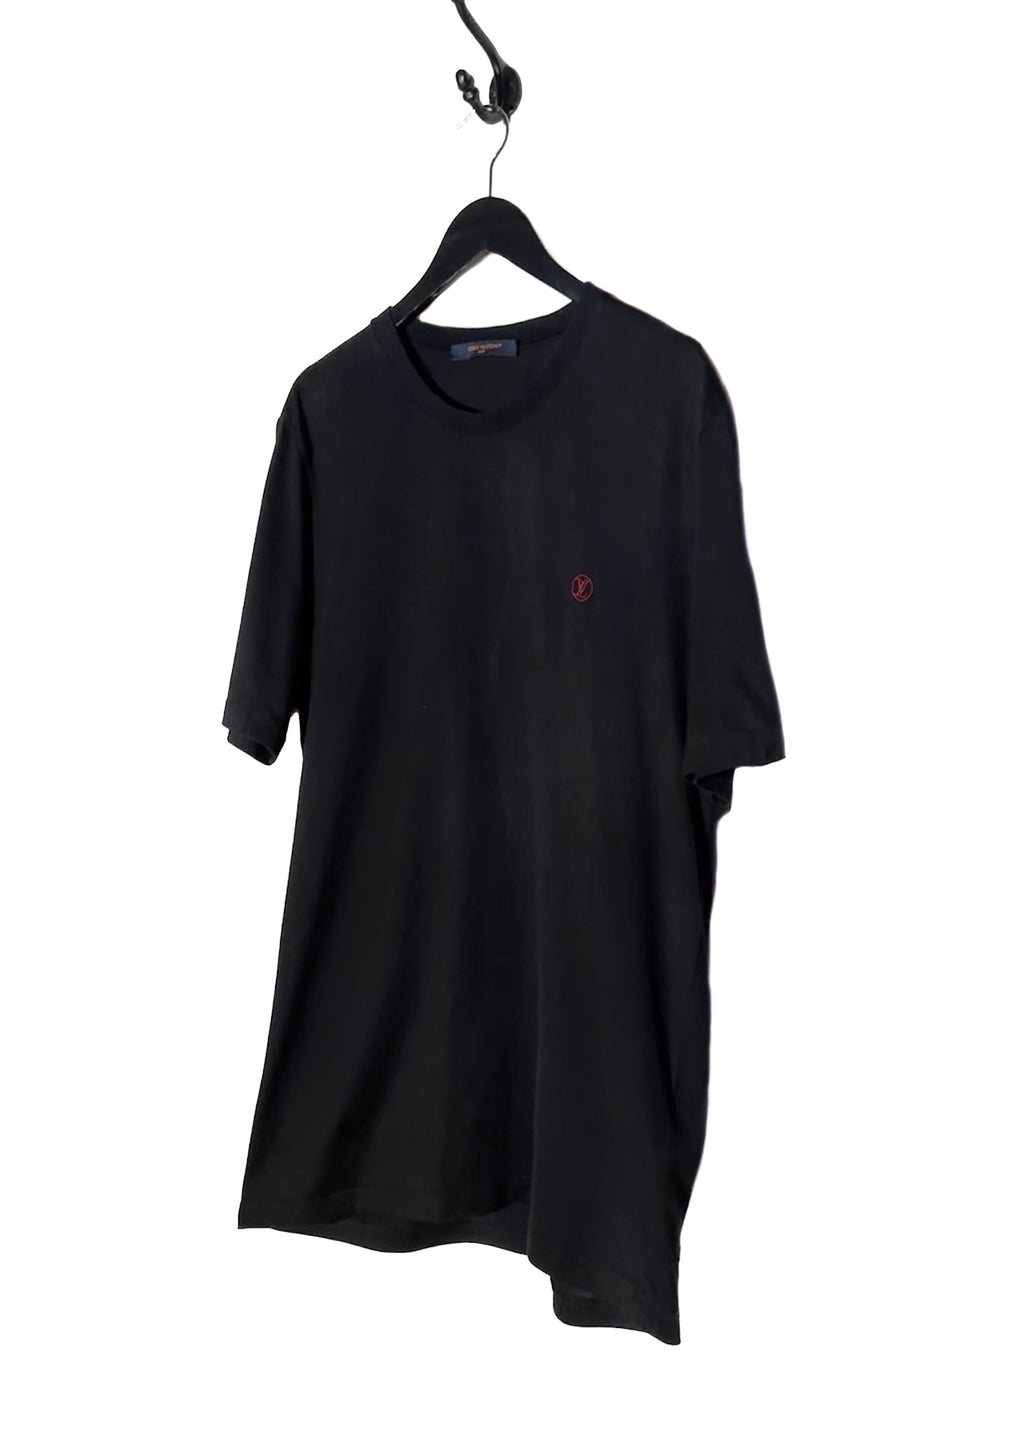 Louis Vuitton Red Logo Embroidered Black T-shirt